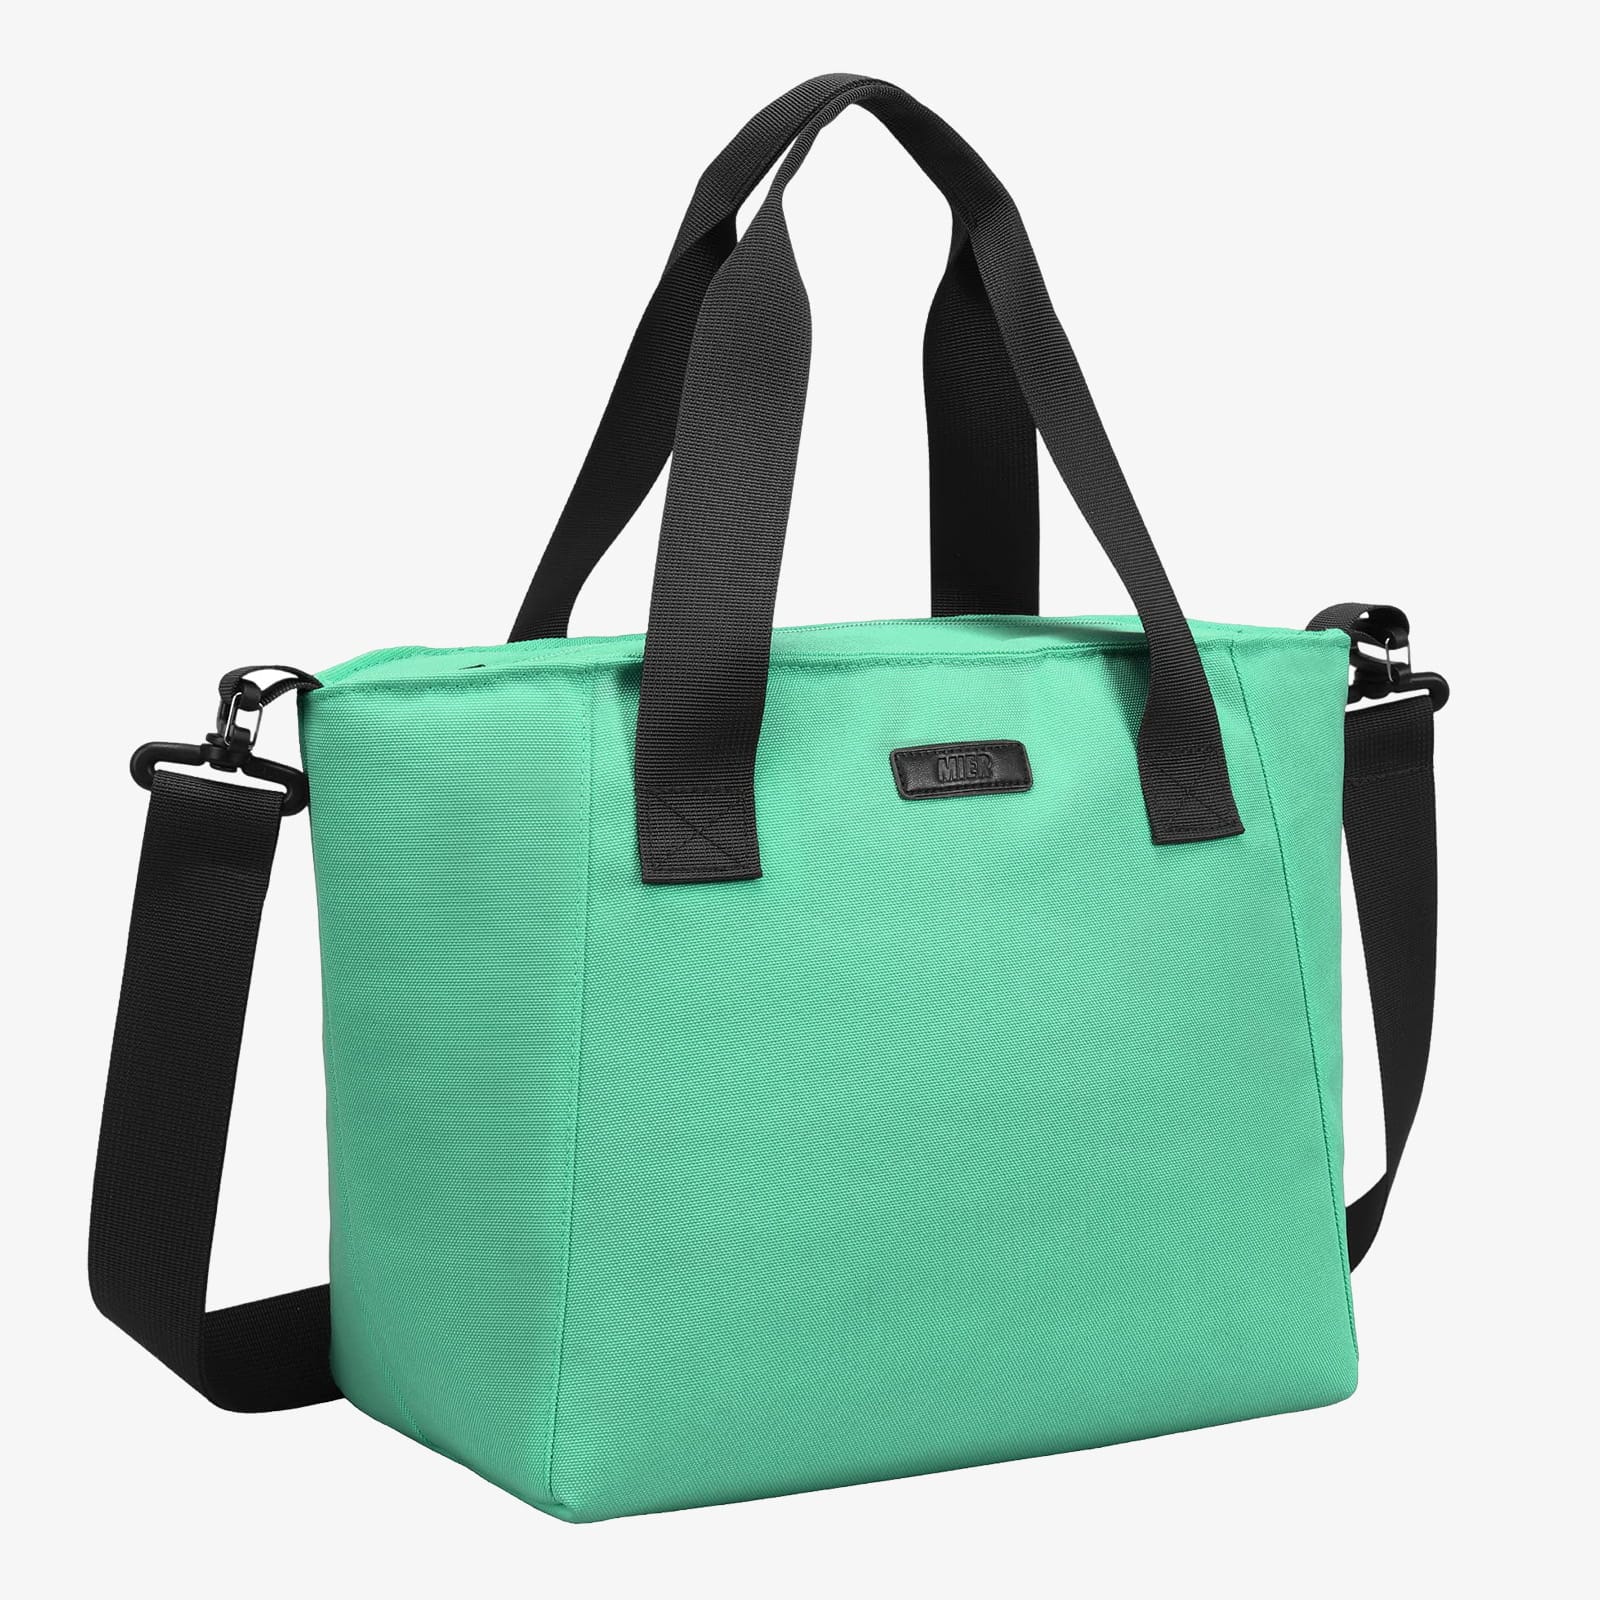 Large Lunch Bags for Women Insulated Lunch Tote Bag Fashionable Lunch Bag MIER